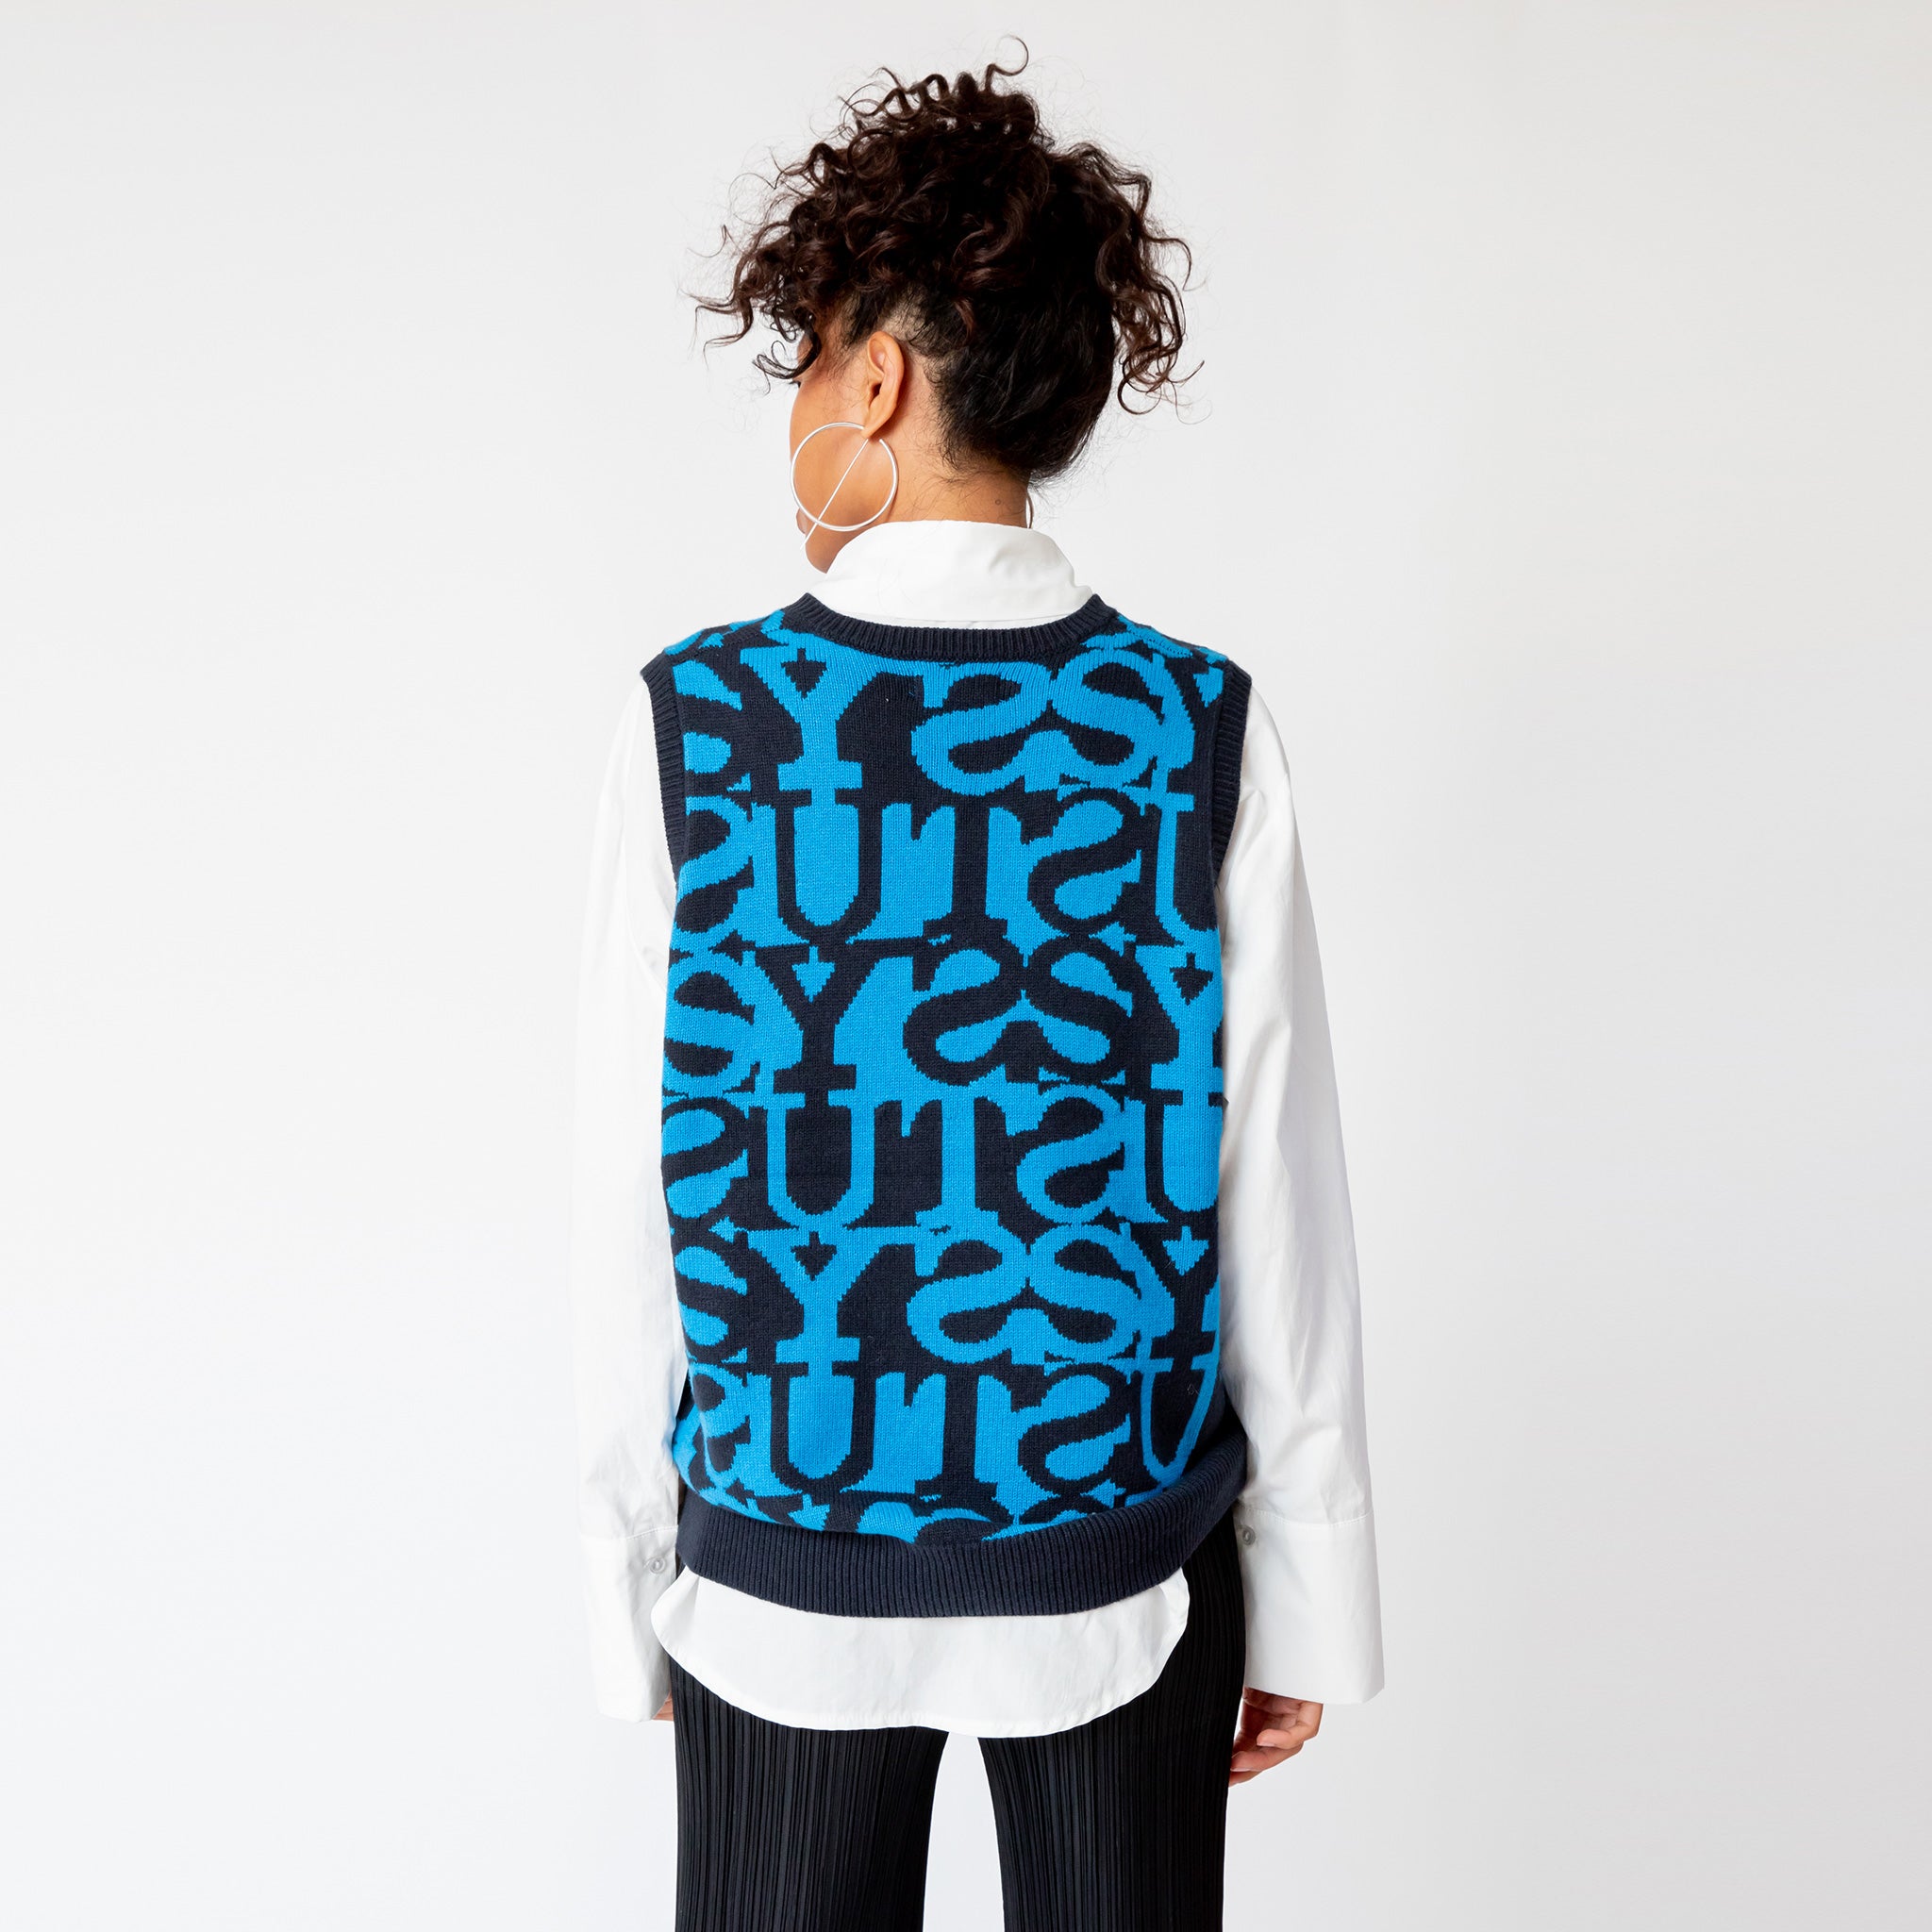 A model wearing the Stussy Stacked Sweater Vest - an oversized mens sweater vest with a blue and black allover repeating print of the word STUSSY - back view.